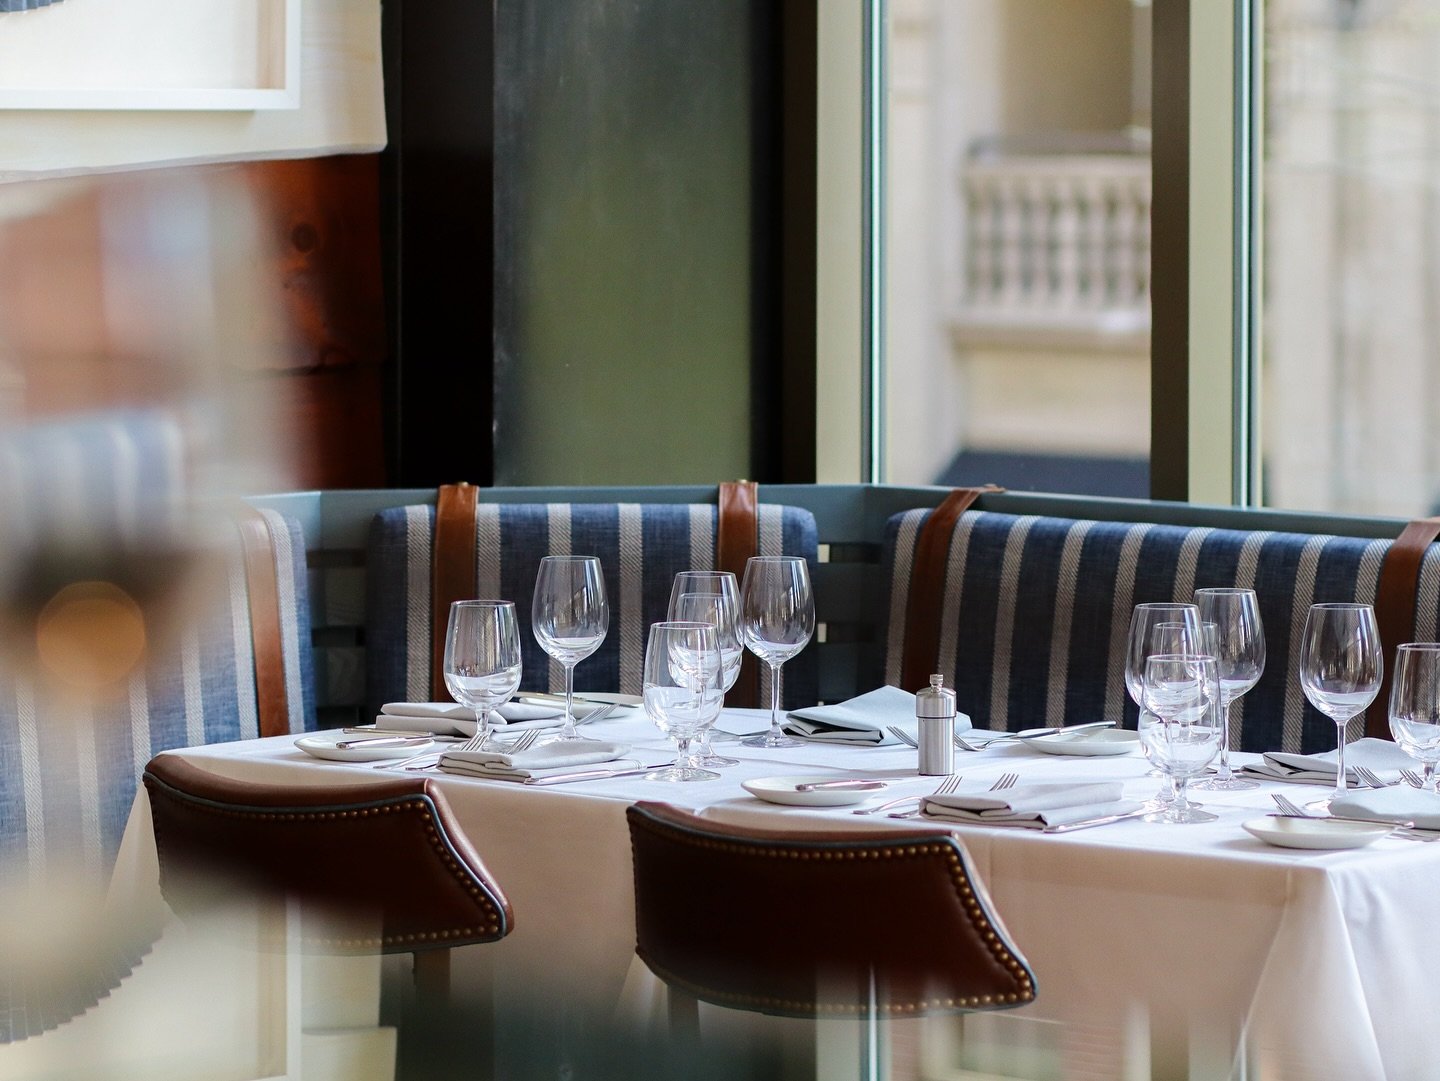 Join us at our table for an unforgettable dining experience where the bounty of the sea meets the charm of Boston. 

#BostonRestaurants #RestaurantDesign #BeautifulRestaurants